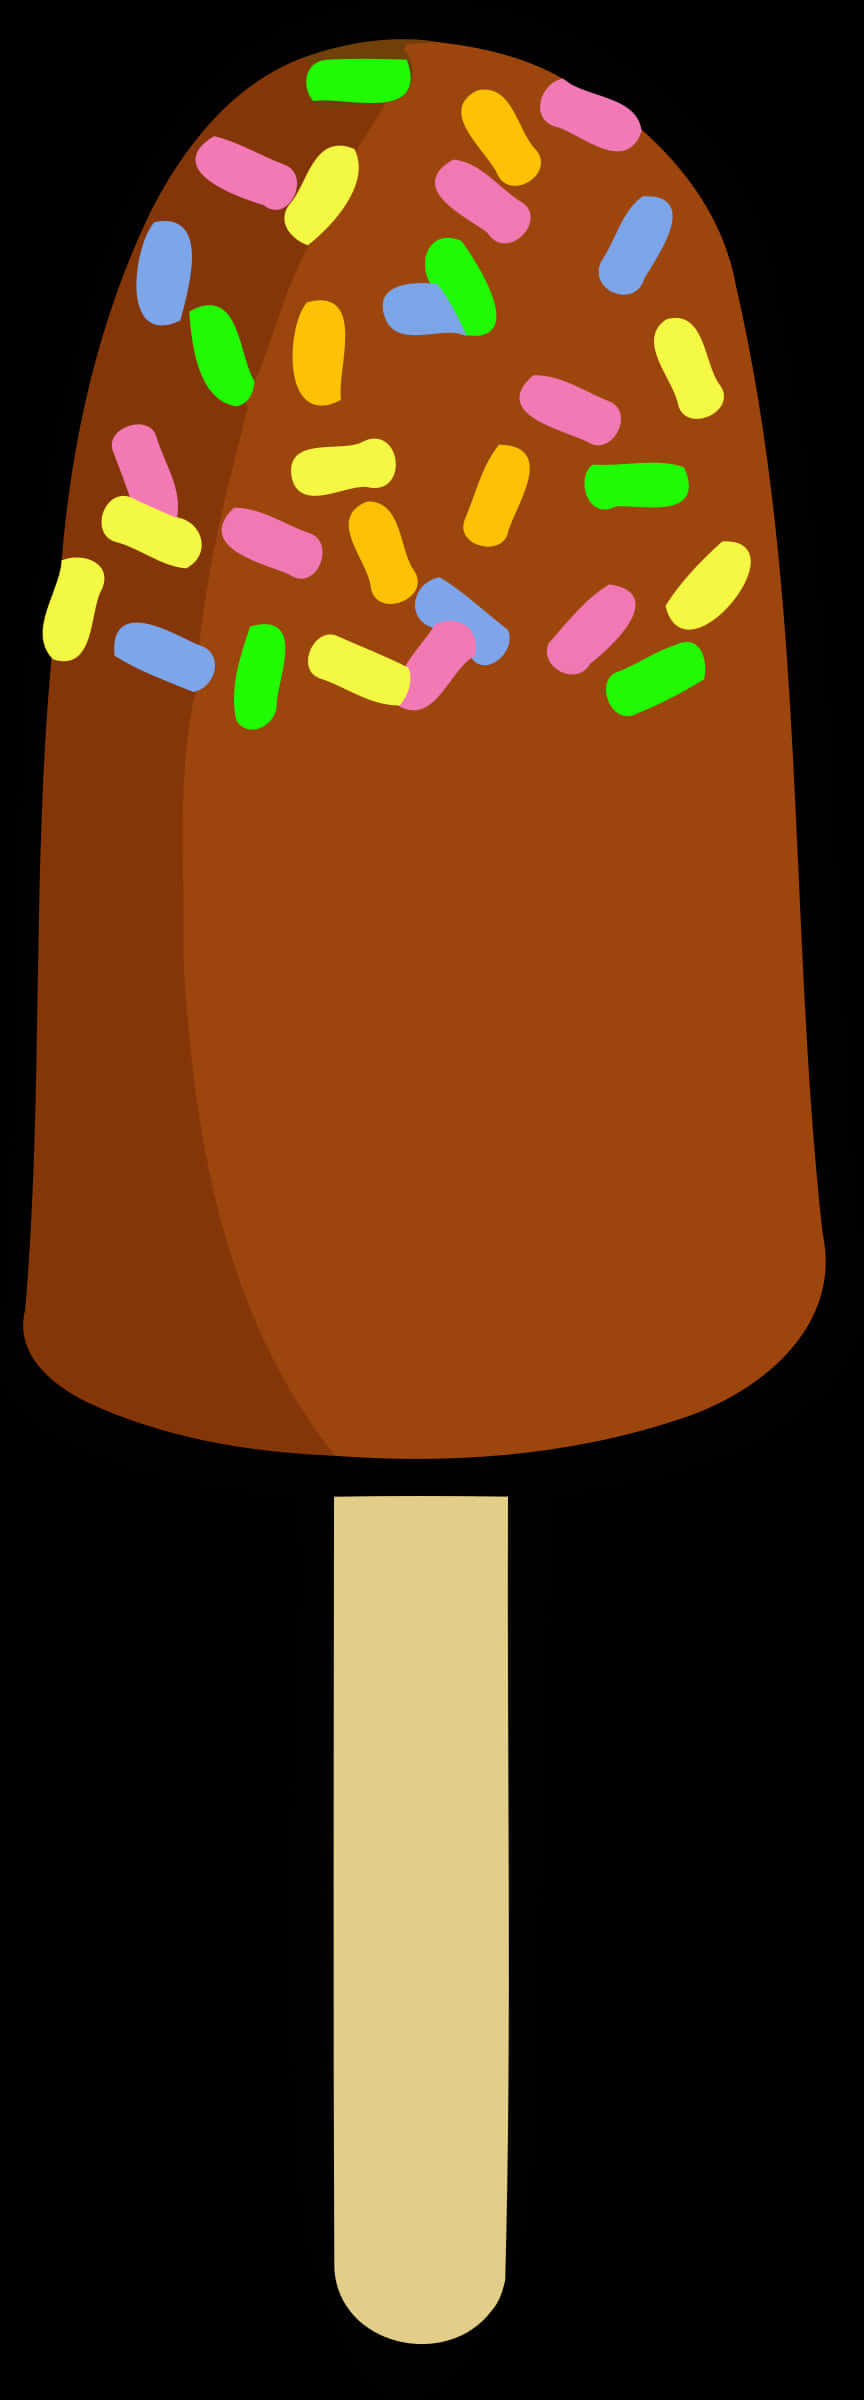 Chocolate Sprinkled Ice Cream Popsicle Clipart PNG image